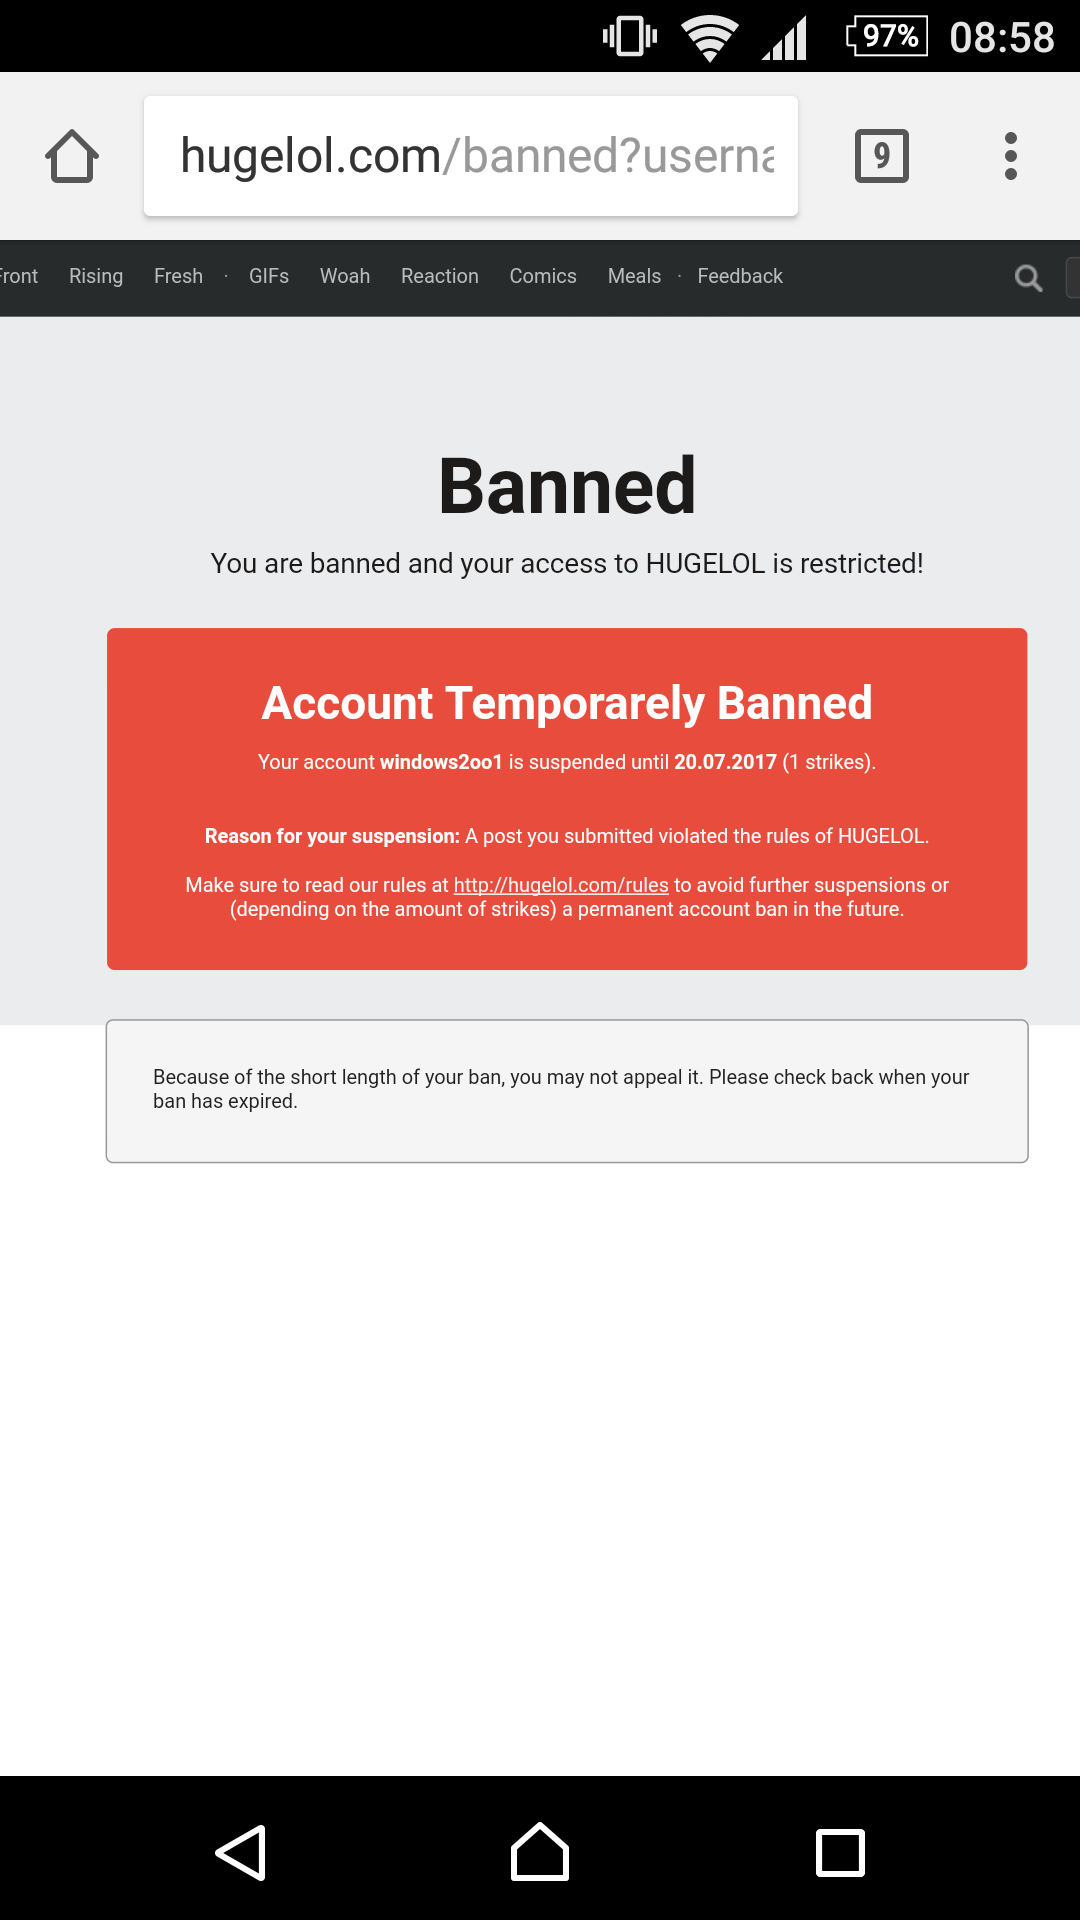 Got banned for doing nothing?